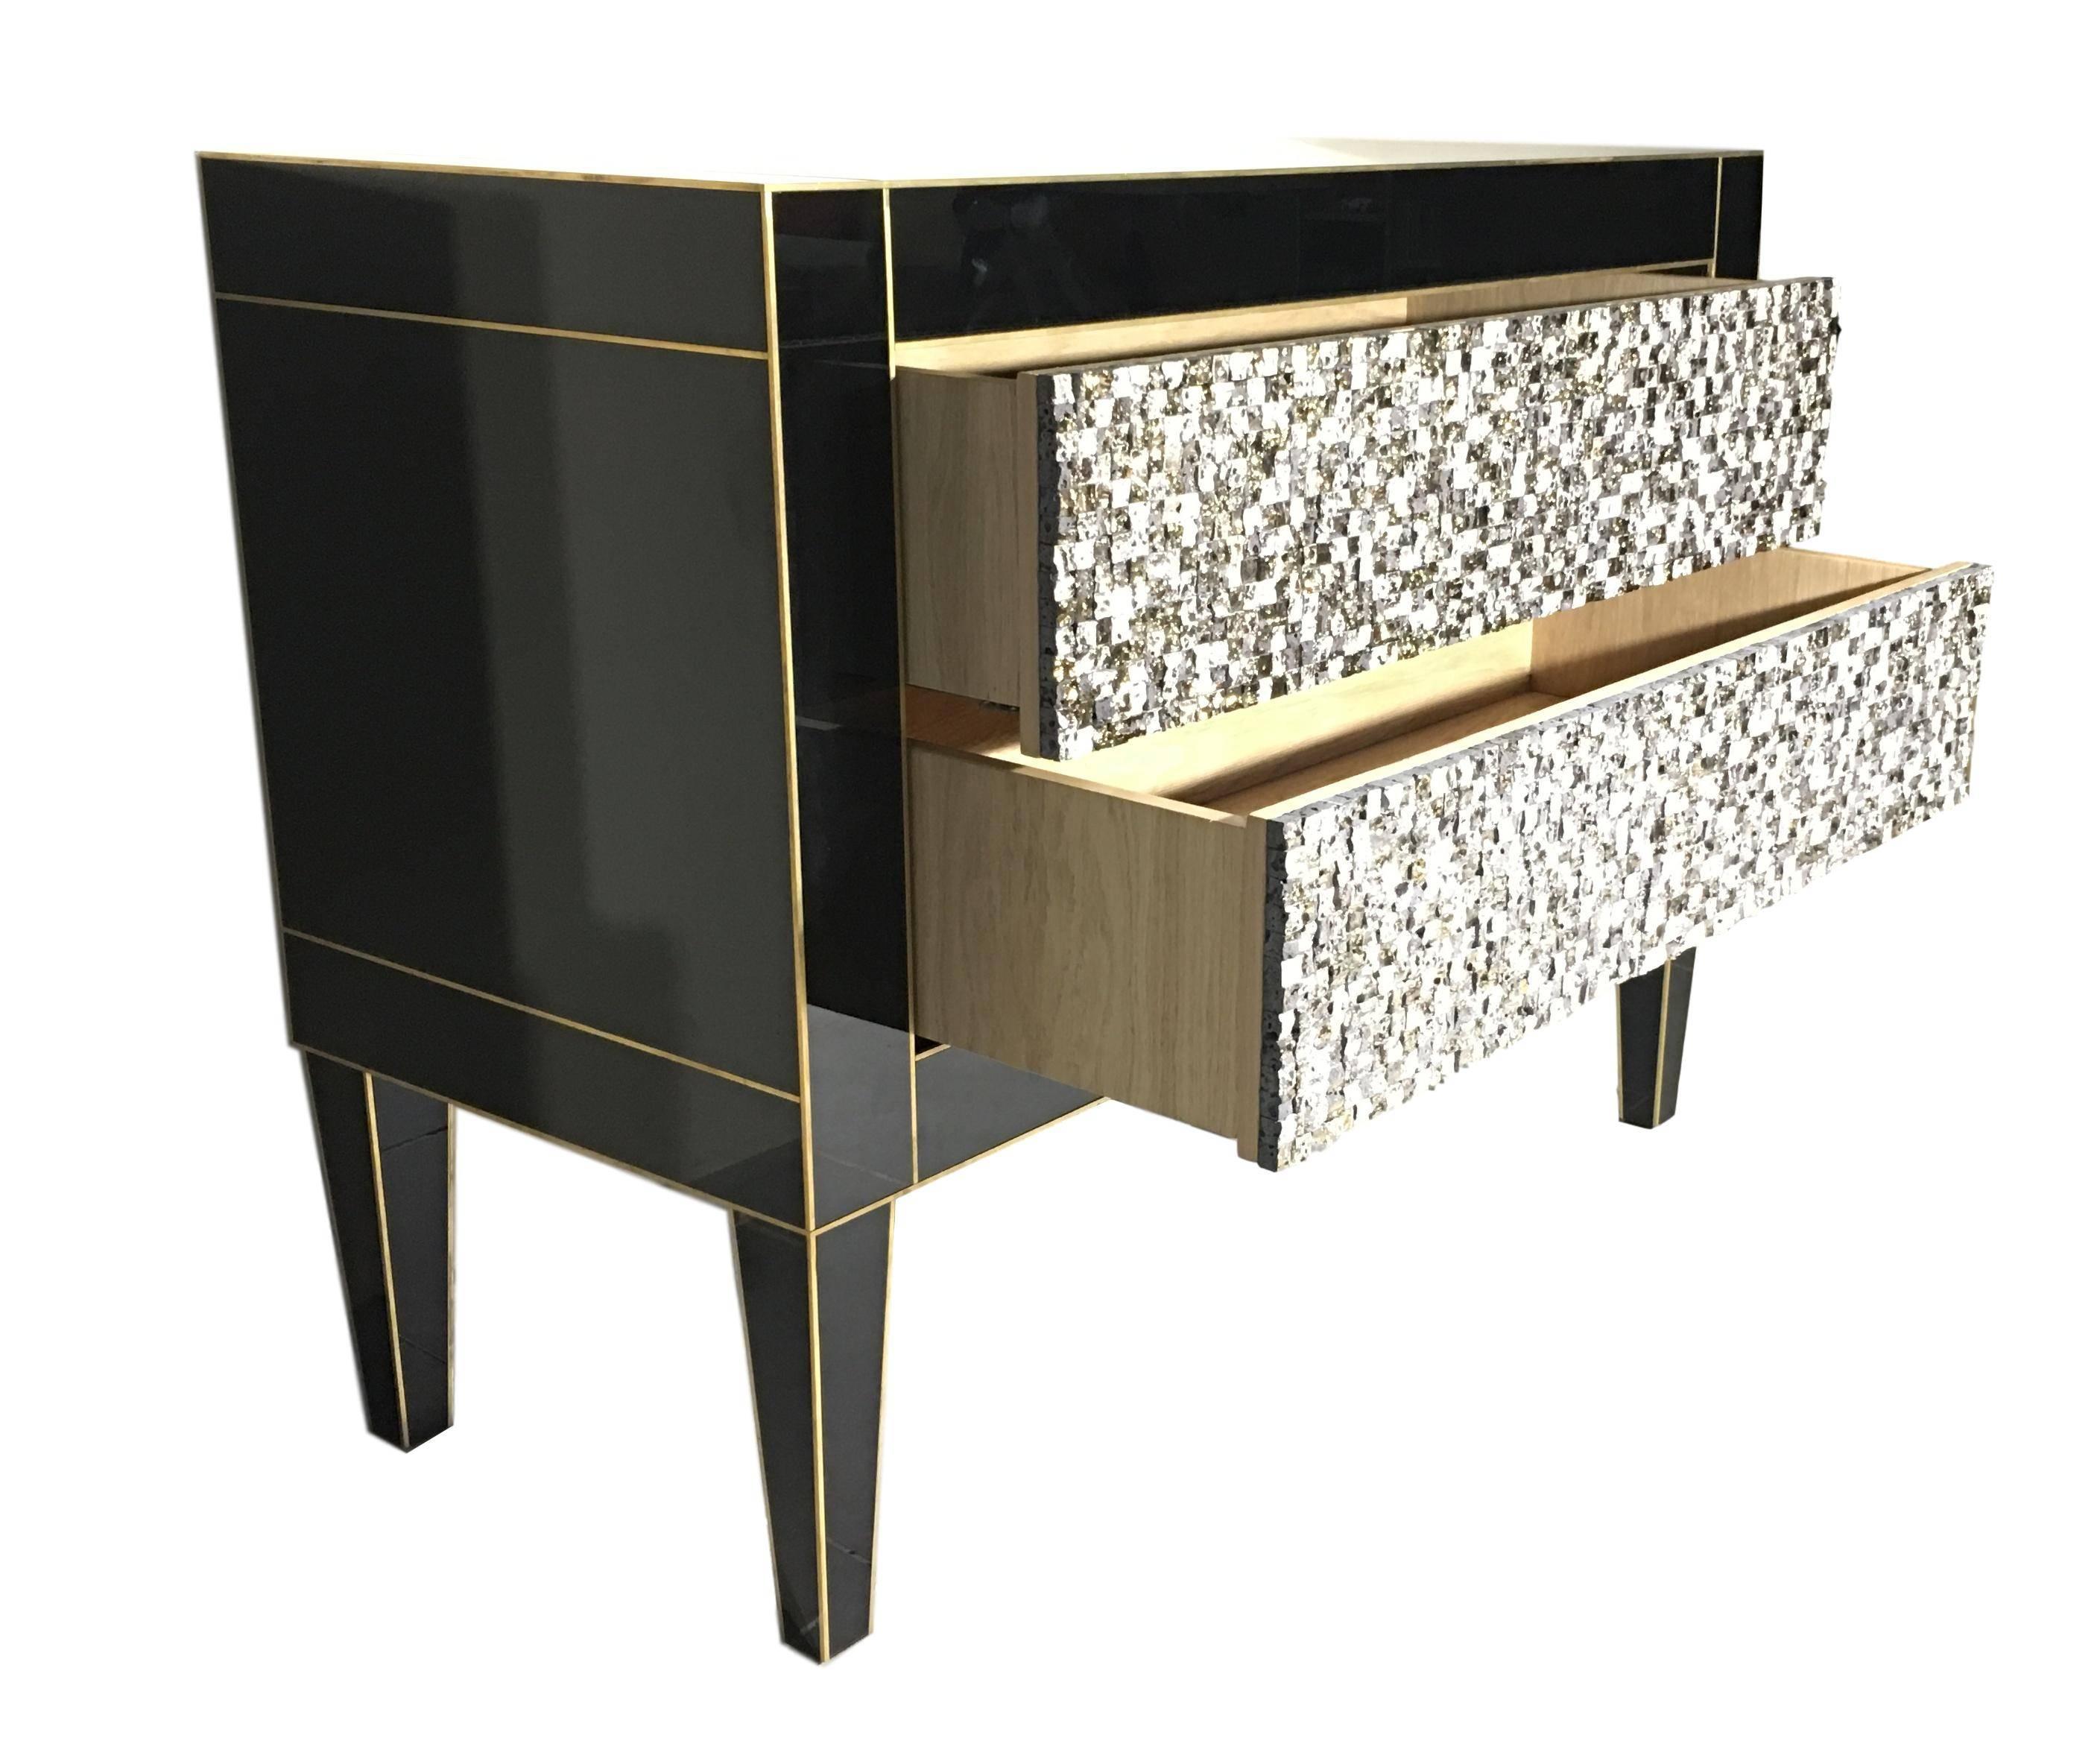 Modern Handmade Mirrored Commode or Chest of Drawers, Volcanic Rock and Brass Inlay